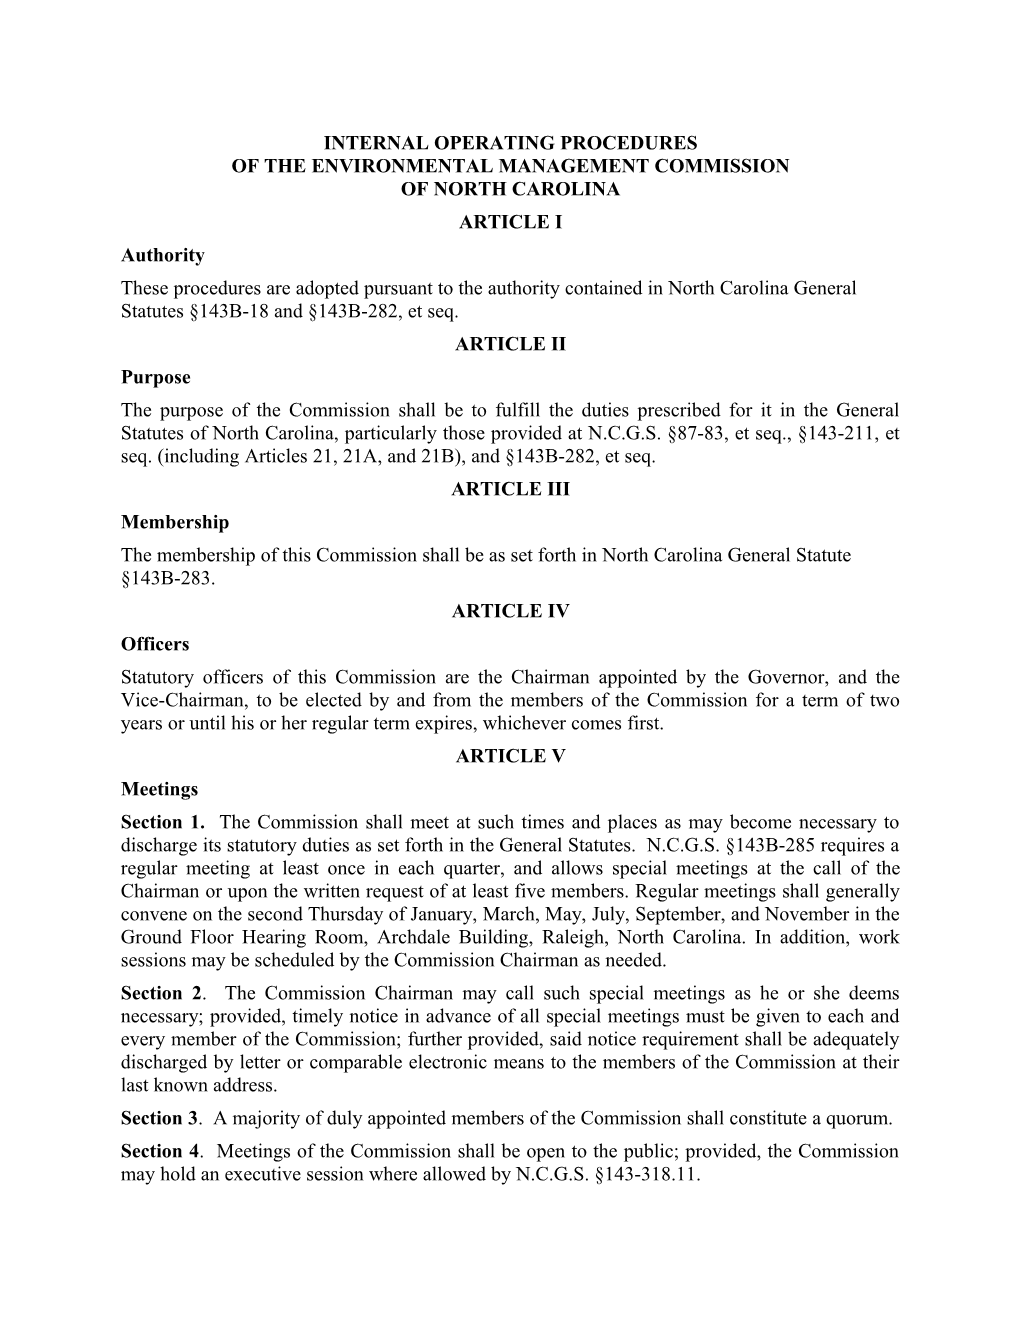 Internal Operating Procedures of the Environmental Management Commission of North Carolina